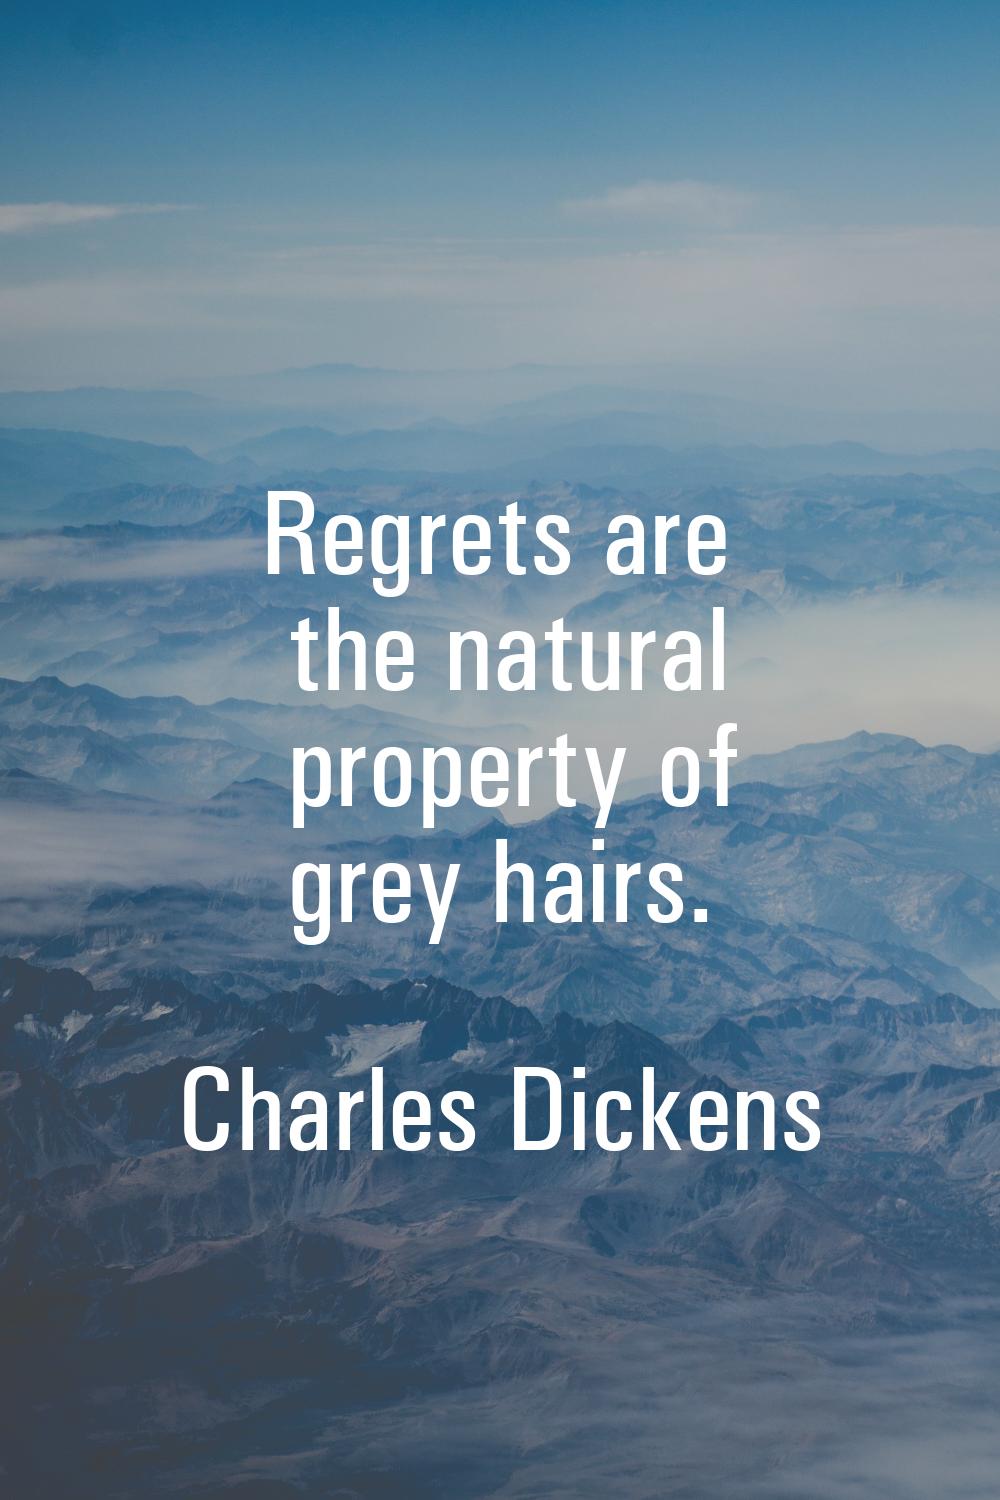 Regrets are the natural property of grey hairs.